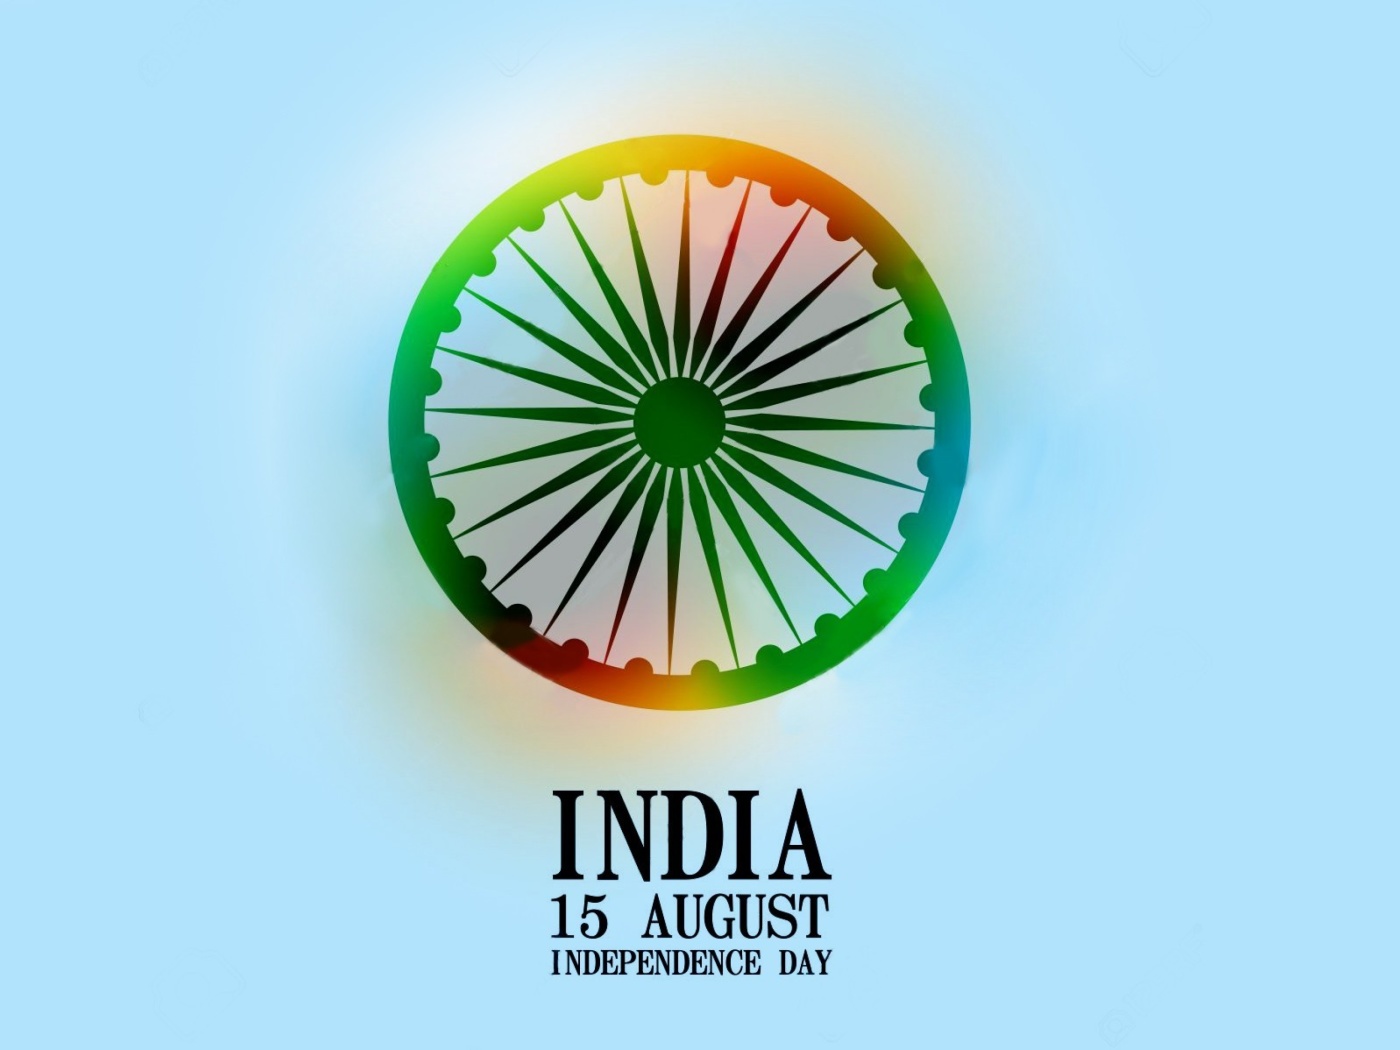 India Independence Day 15 August wallpaper 1400x1050